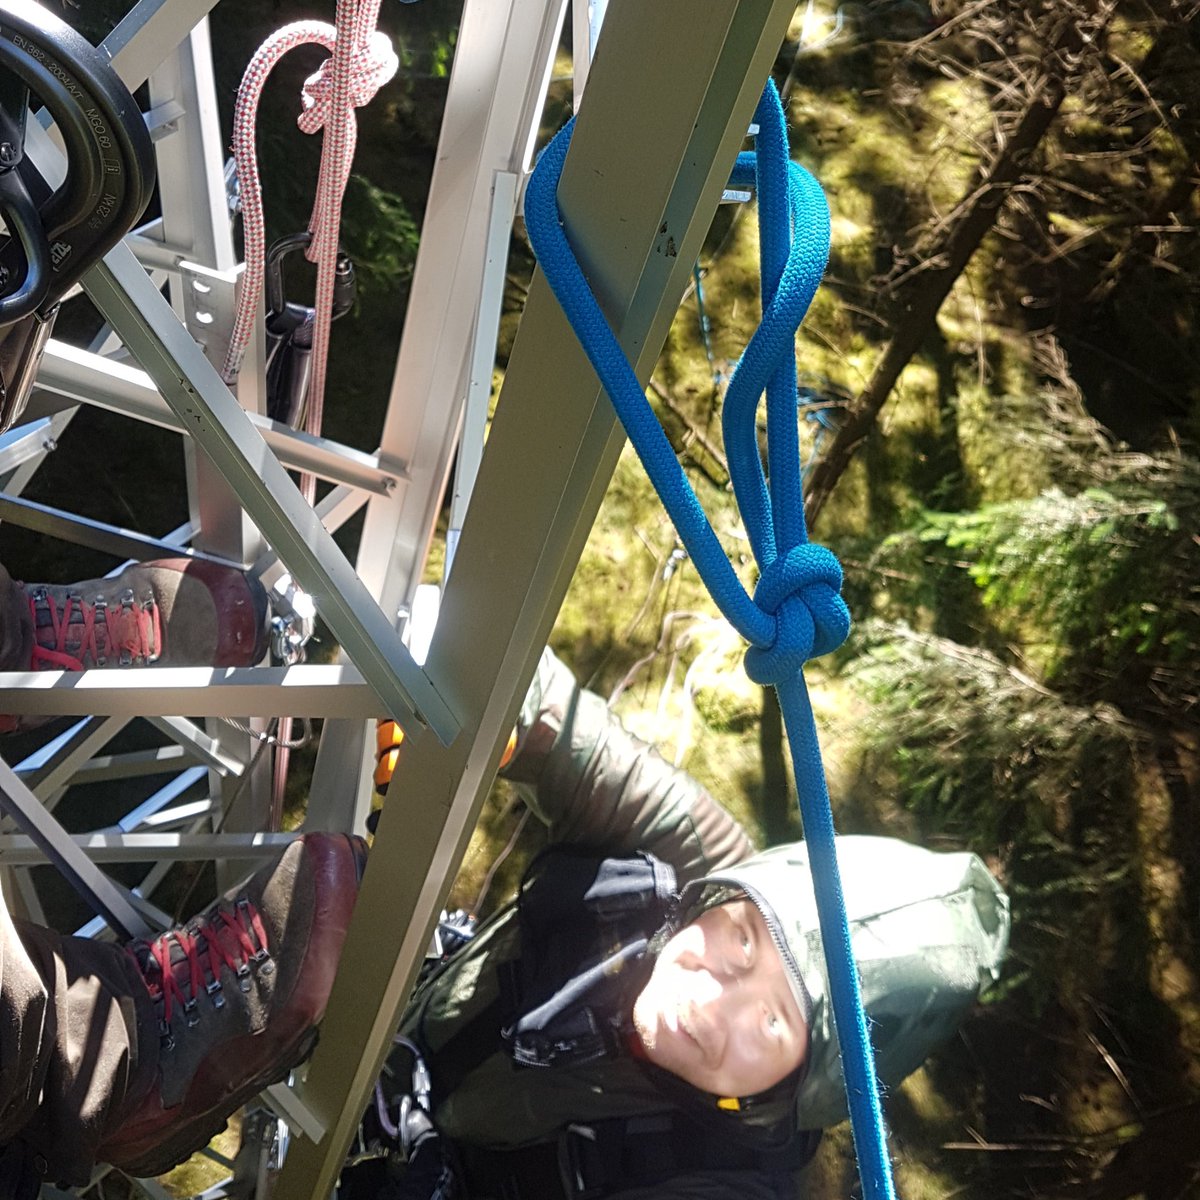 Yesterday we were busy installing a new mast @SE_Htm for sub canopy turbulence and later #eddycovariance measurements to estimate #carbonfluxes. So far the new mast opens up some new perspectives in the #forest and is a great place to escape the mosquitos.